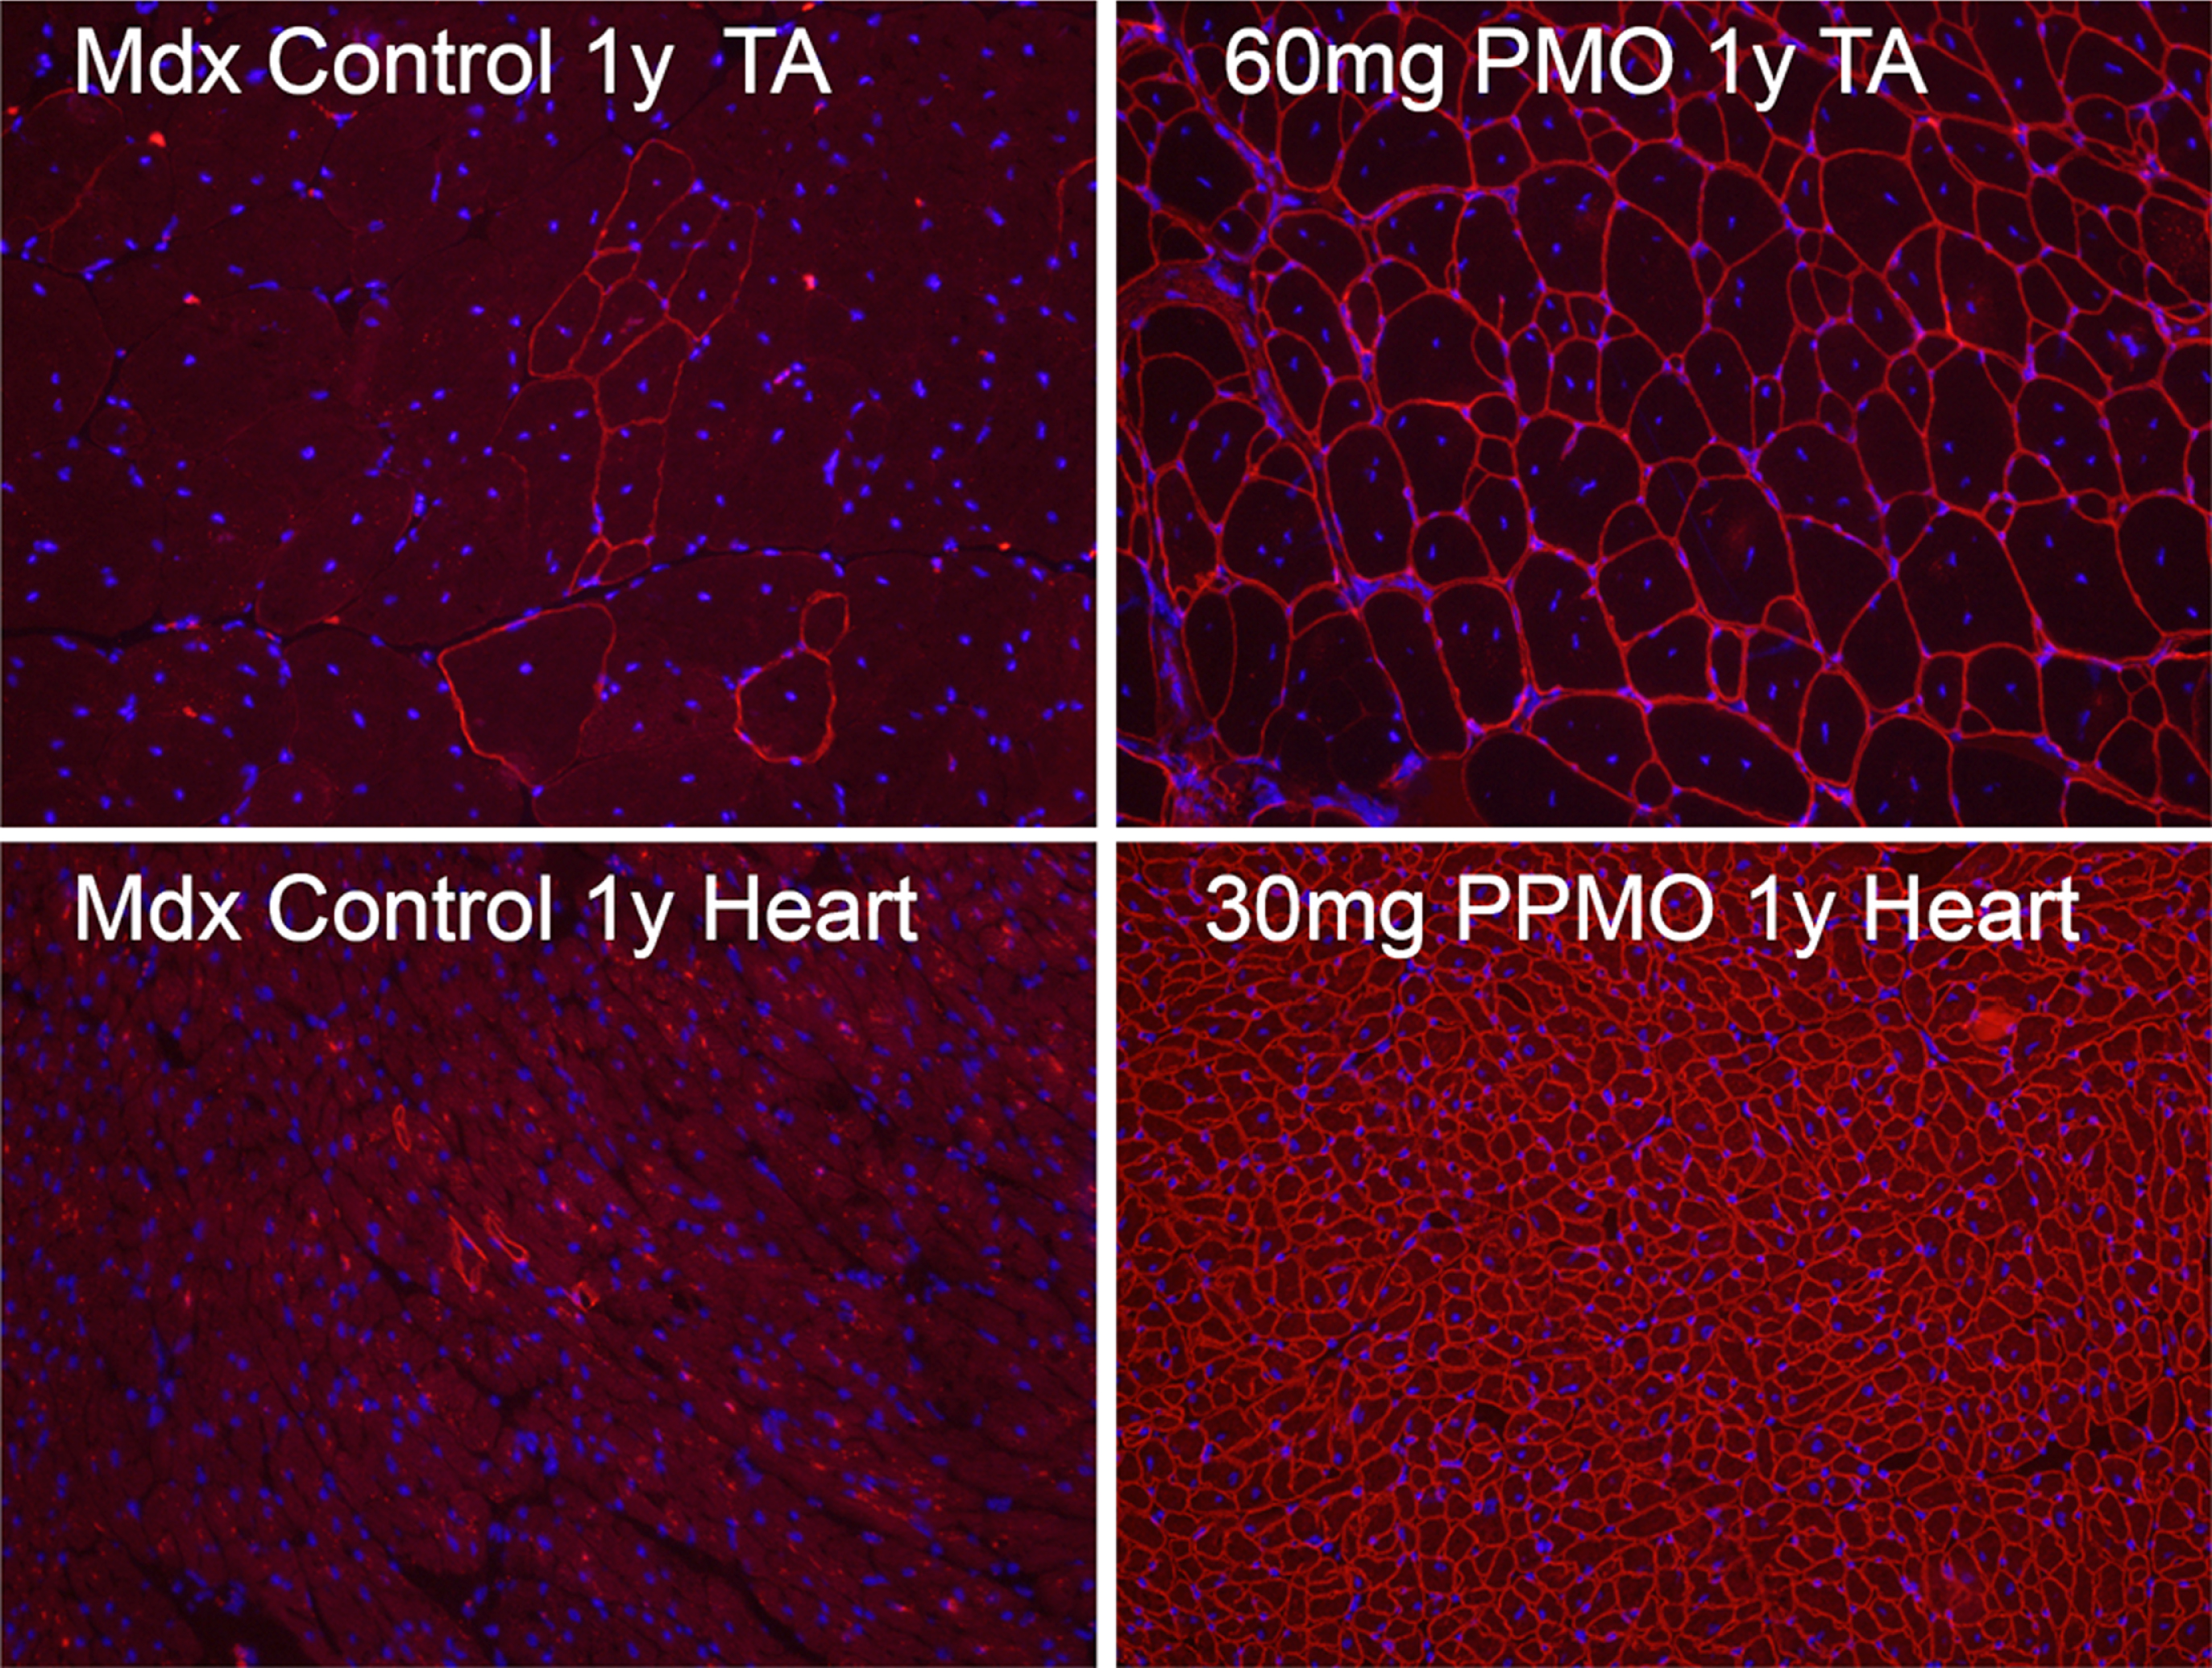 Revertant fibers in skeletal and cardiac muscles (Control, left panel) of mdx mice and mdx mice treated for 1 year (1y) with 60 mg/kg morpholino (PMO, upper right) and 30 mg/kg peptide-conjugated morpholino (PPMO, lower right) antisense oligonucleotide targeting exon 23 of dystrophin gene. Dystrophin is recognized with primary rabbit anti-dystrophin antibody P7 and detected by donkey anti-rabbit Alexa Fluor 594. Nuclei (blue) are stained with DAPI.